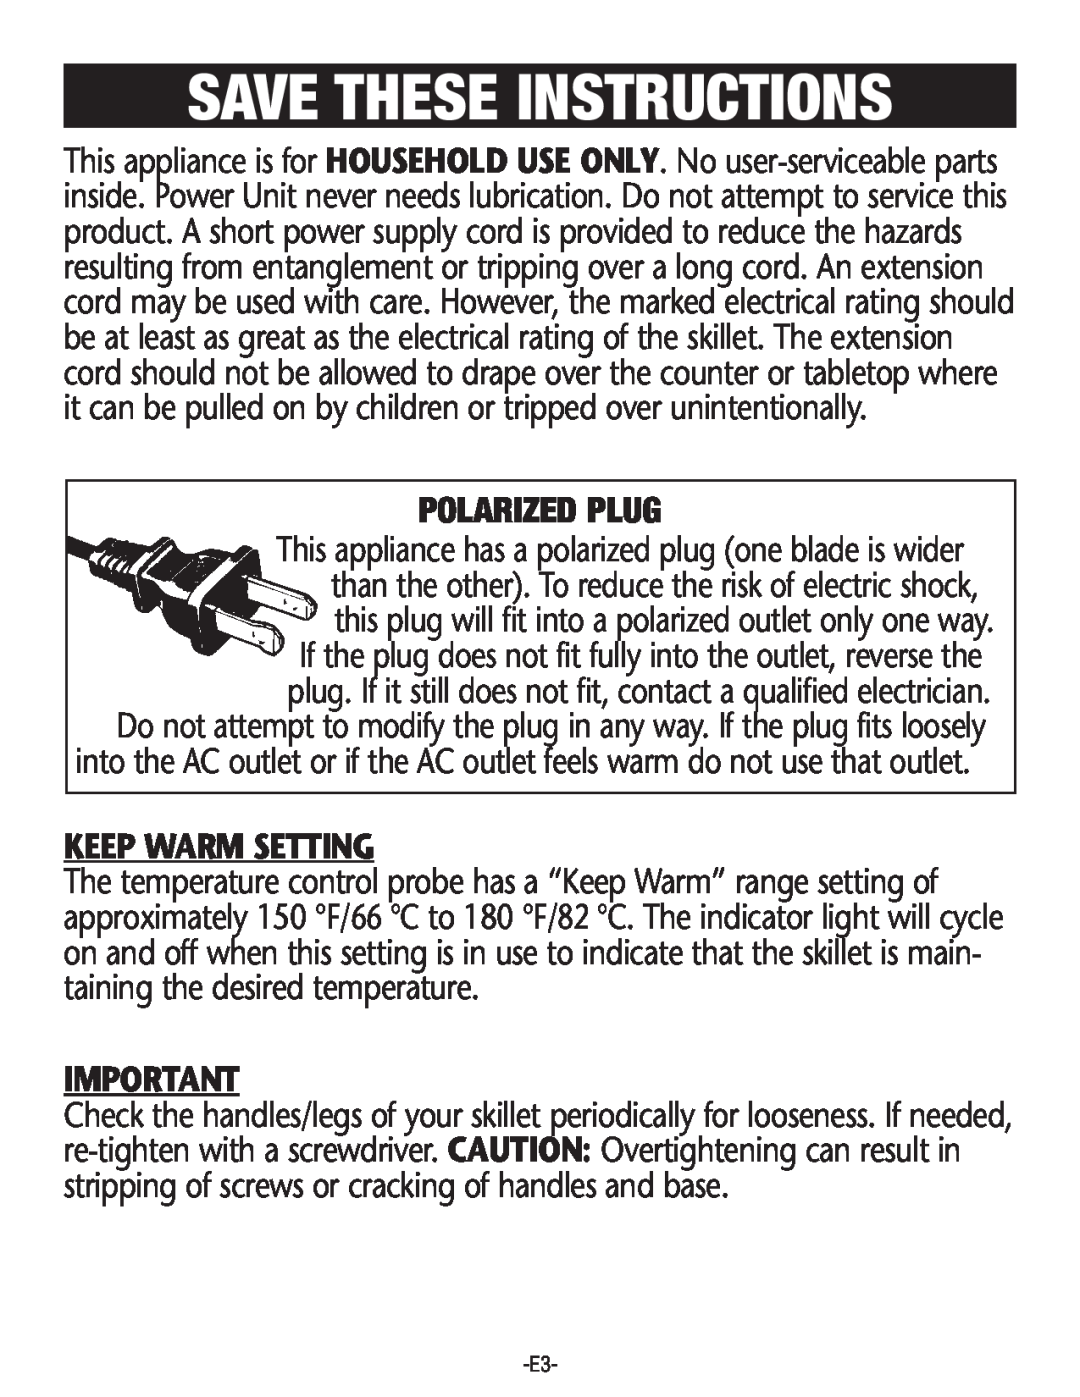 Rival S160 manual Save These Instructions, Polarized Plug, Keep Warmsetting 